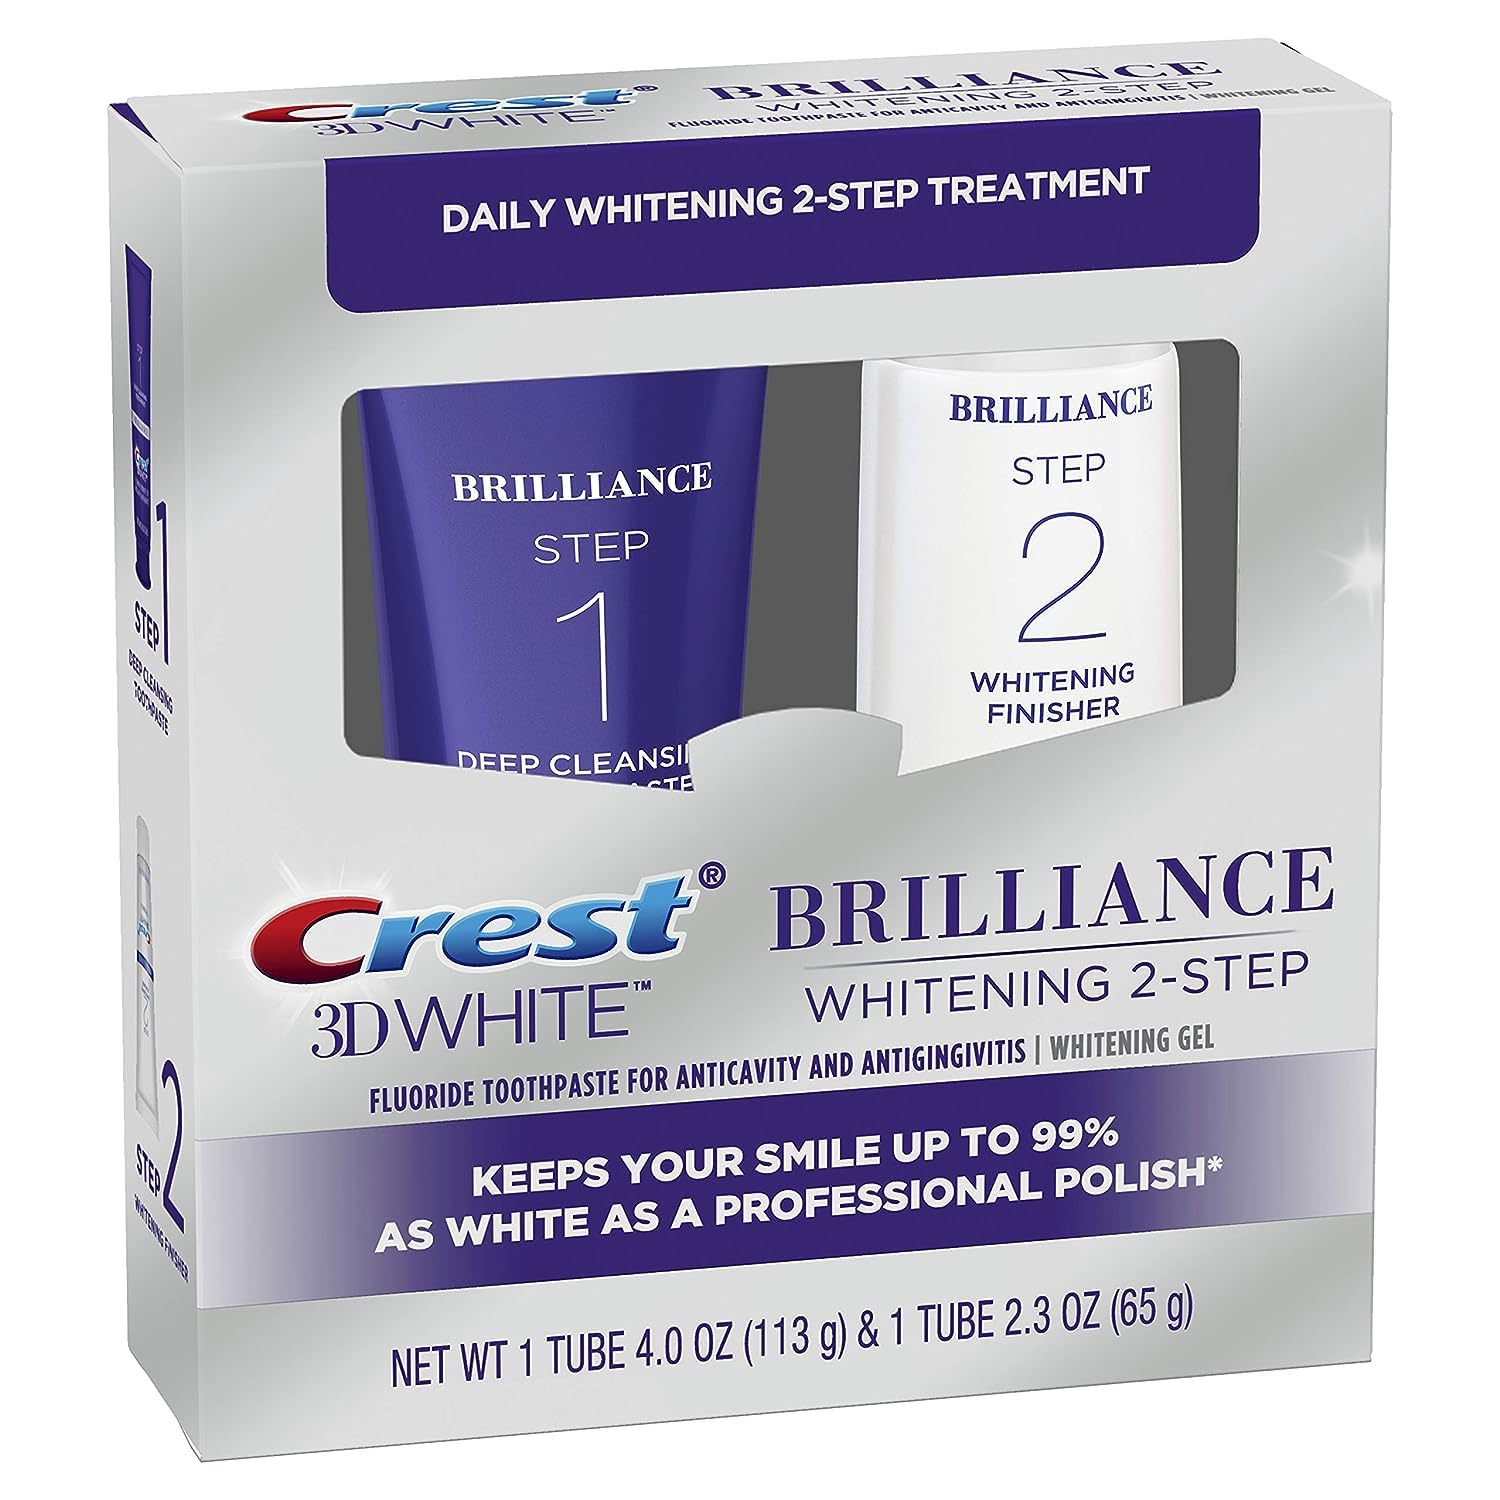 Crest 3D White Brilliance 2 Step Kit: 4-Oz Deep Clean Toothpaste + 2.3-Oz Teeth Whitening Gel 2 for $17.55 ($8.78 each) w/ S&S + Free Shipping w/ Prime or on $35+